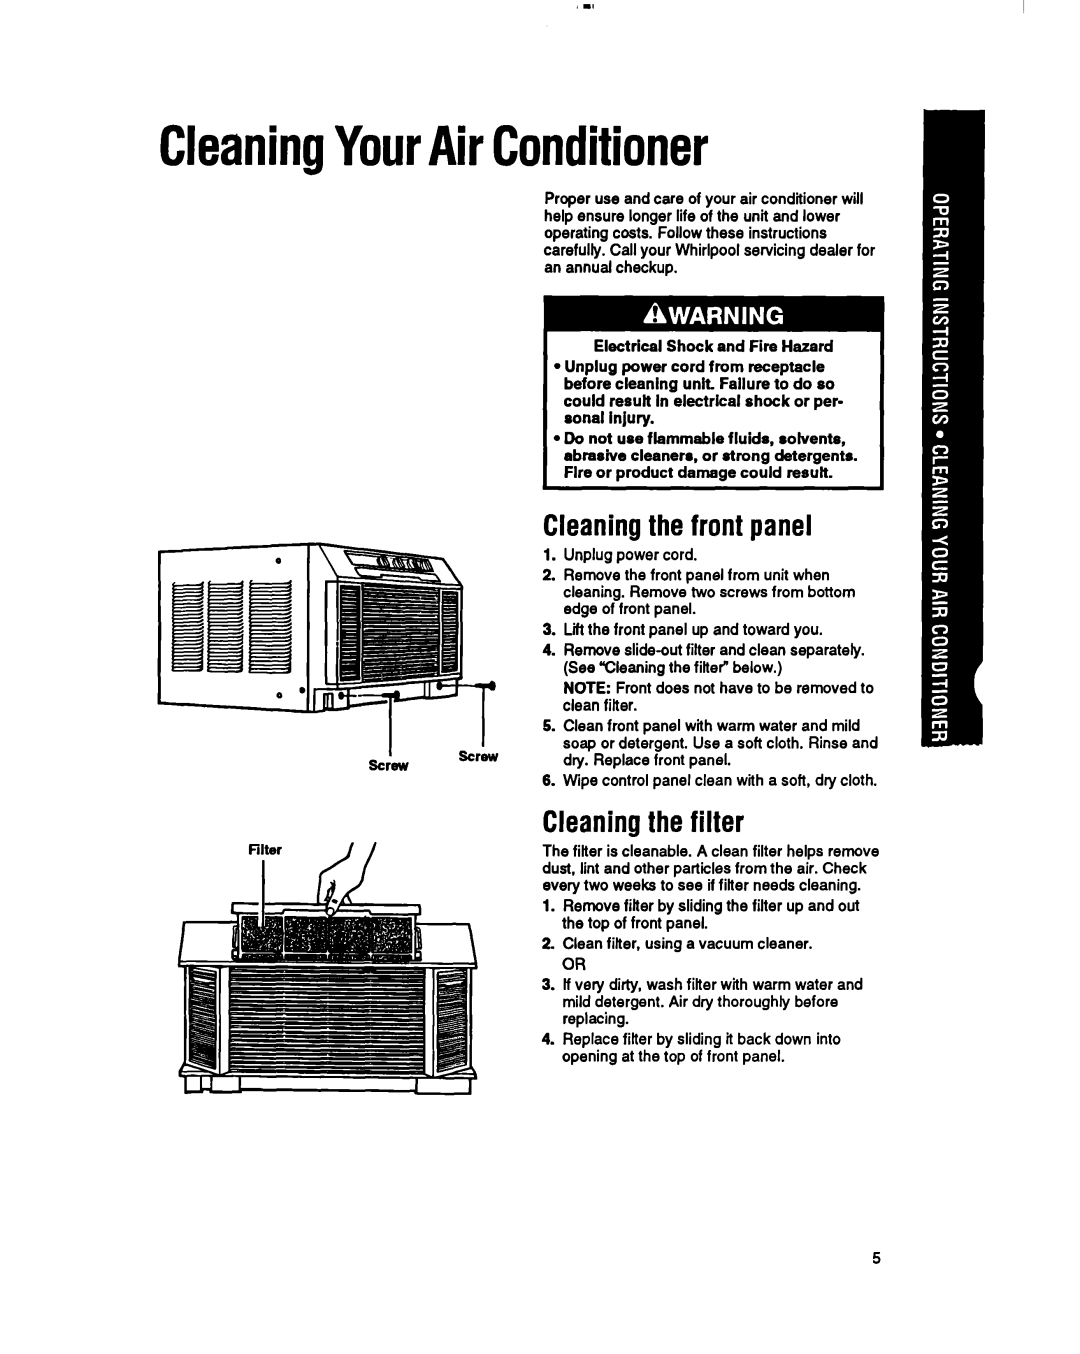 Whirlpool RH123A1 manual CleaningYourAirConditioner, Cleaningthe front panel, Cleaningthe filter 